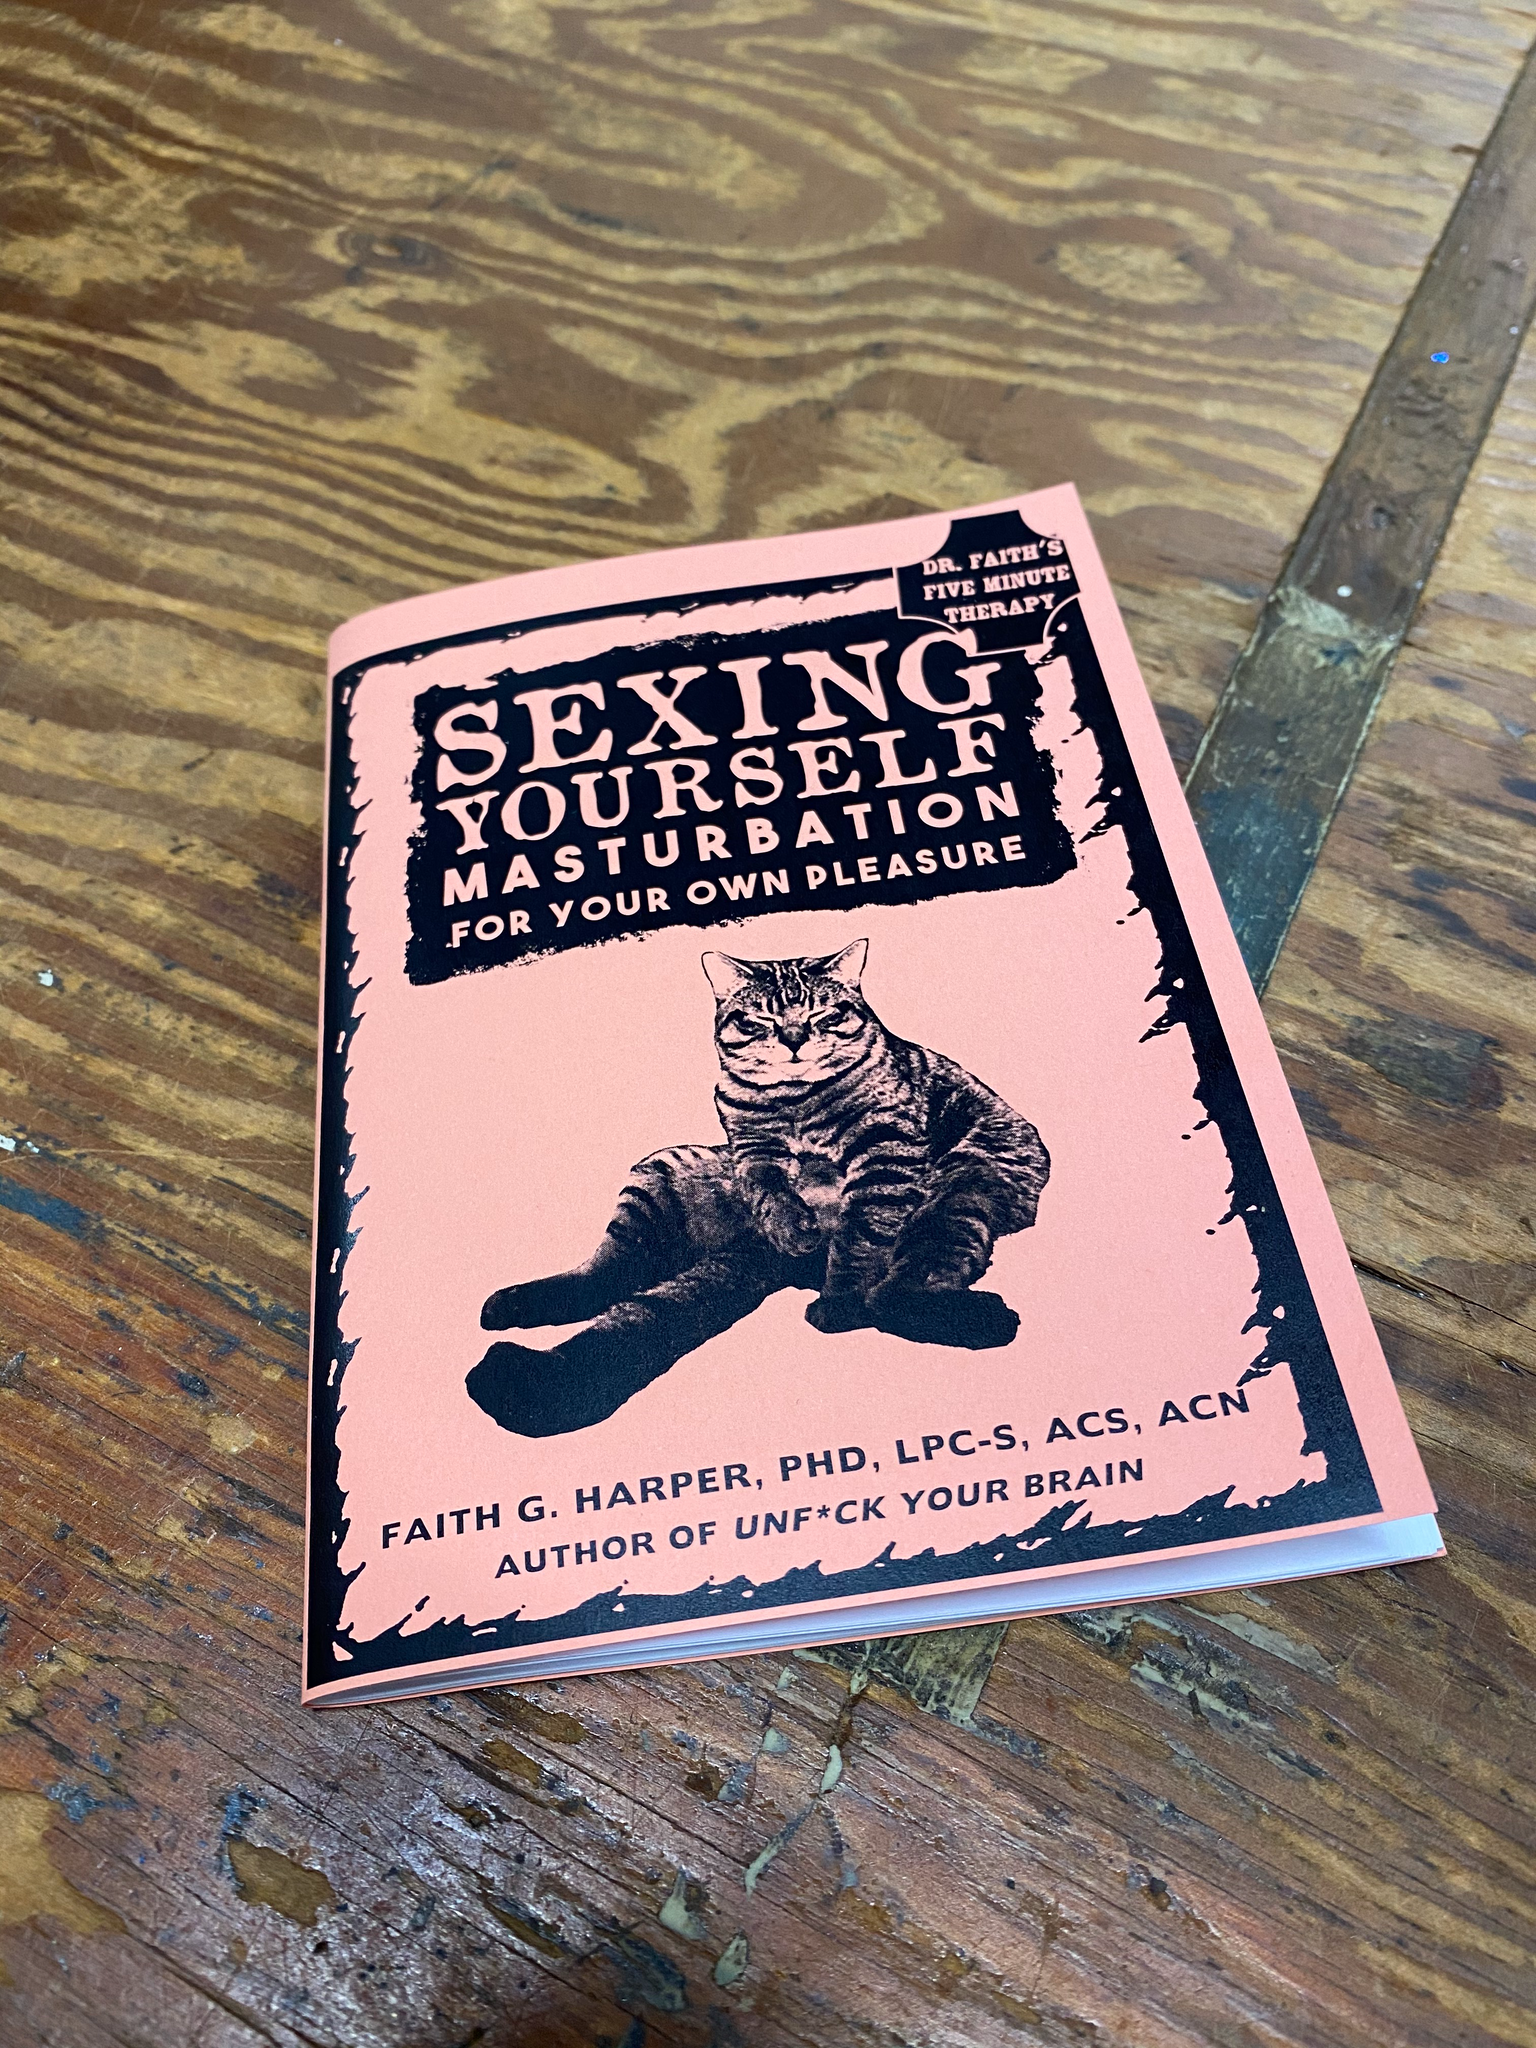 Sexting Yourself Masturbation For Your Own Pleasure Booklet